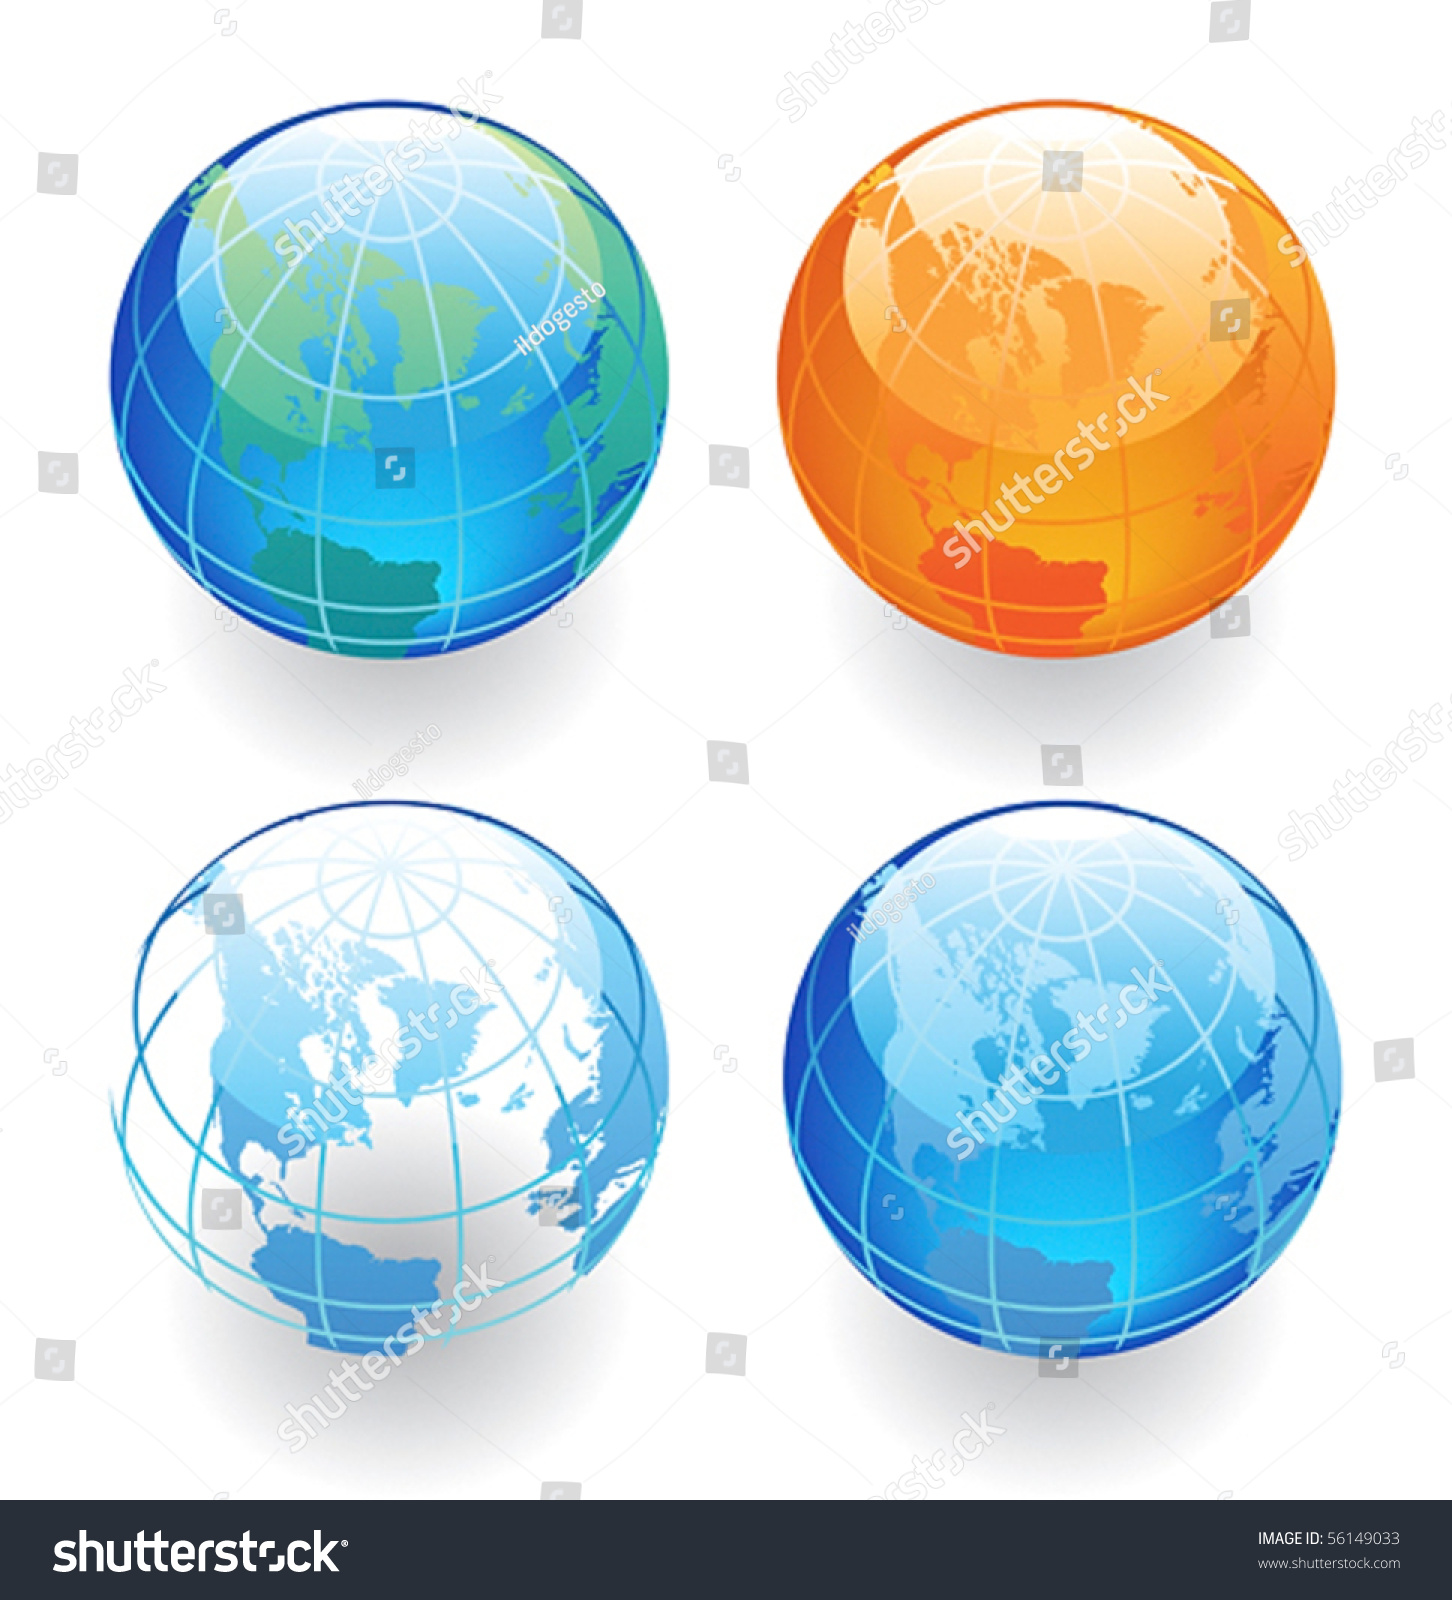 Globes In Various Colors Vector Illustration Shutterstock